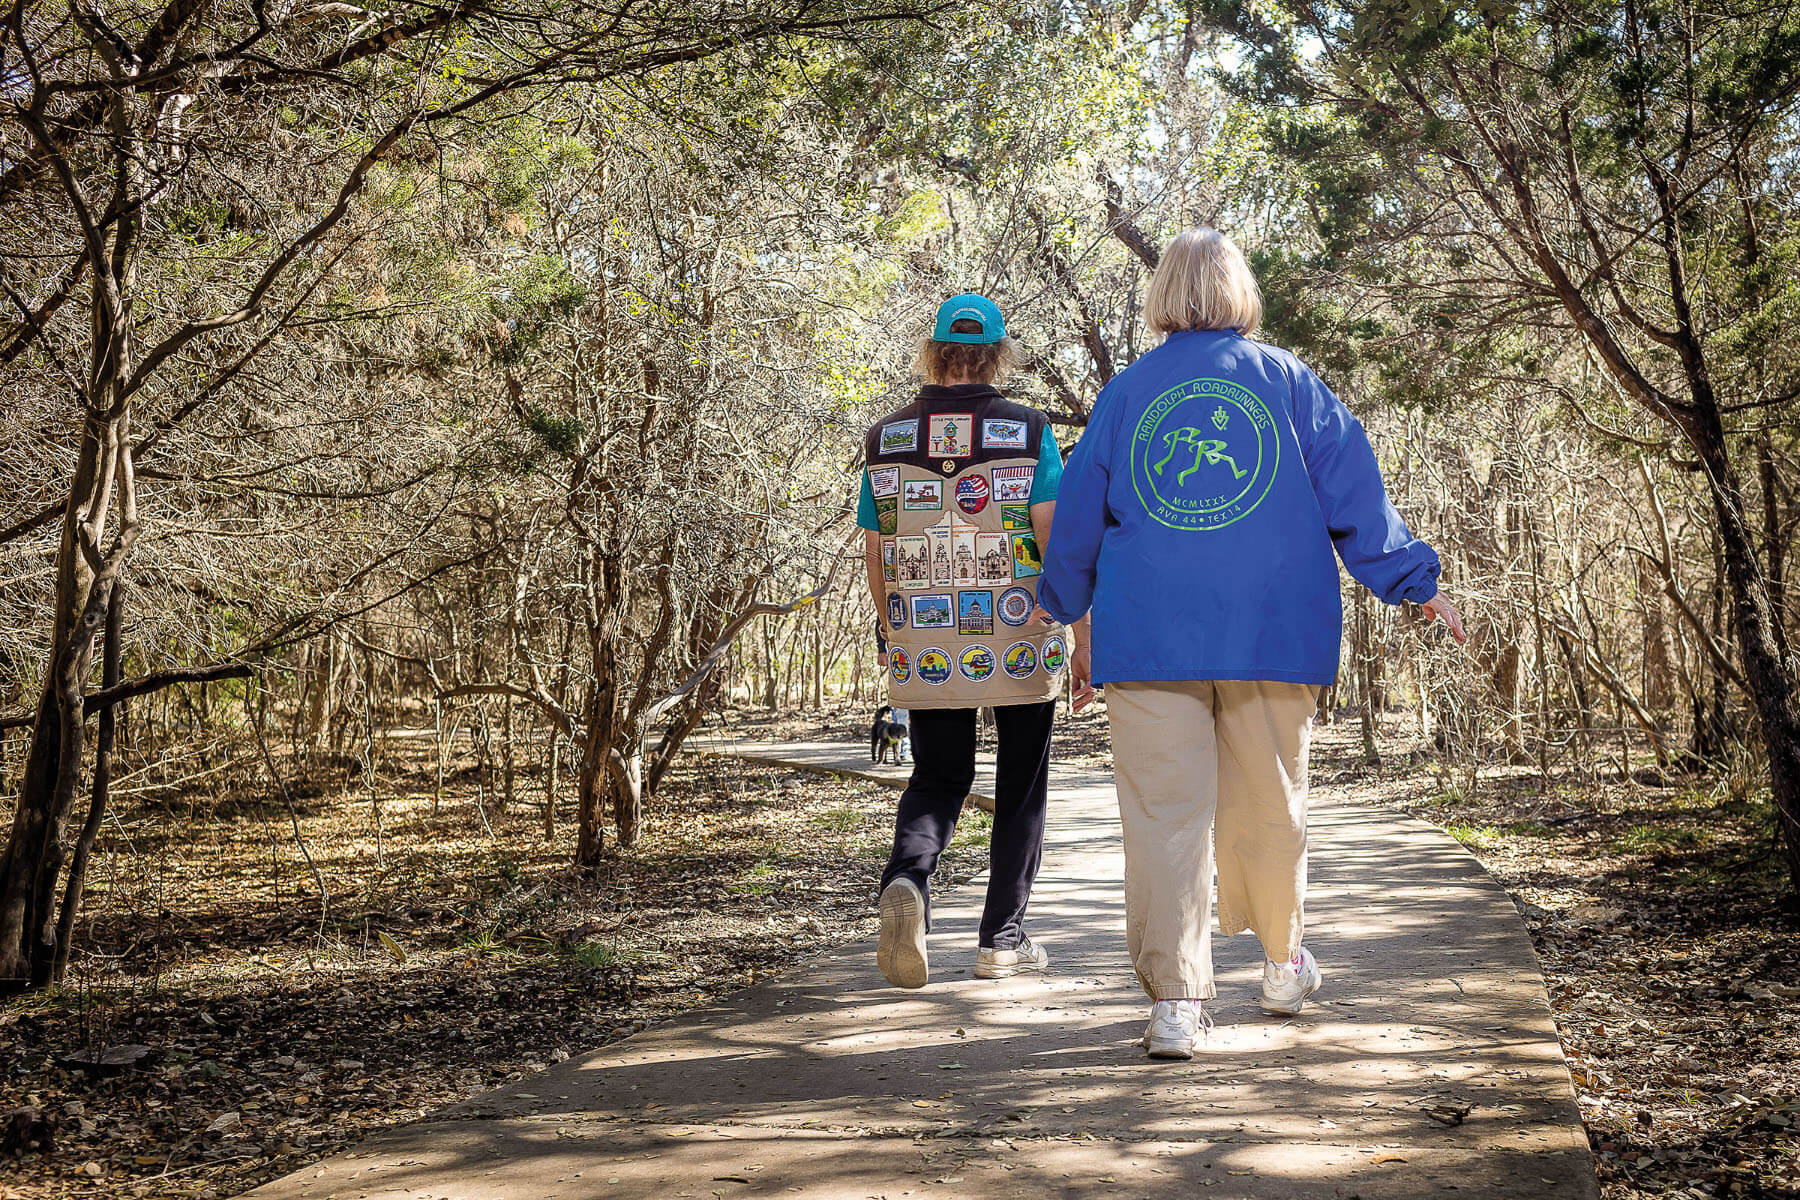 An image of two people walking together through a wooded area